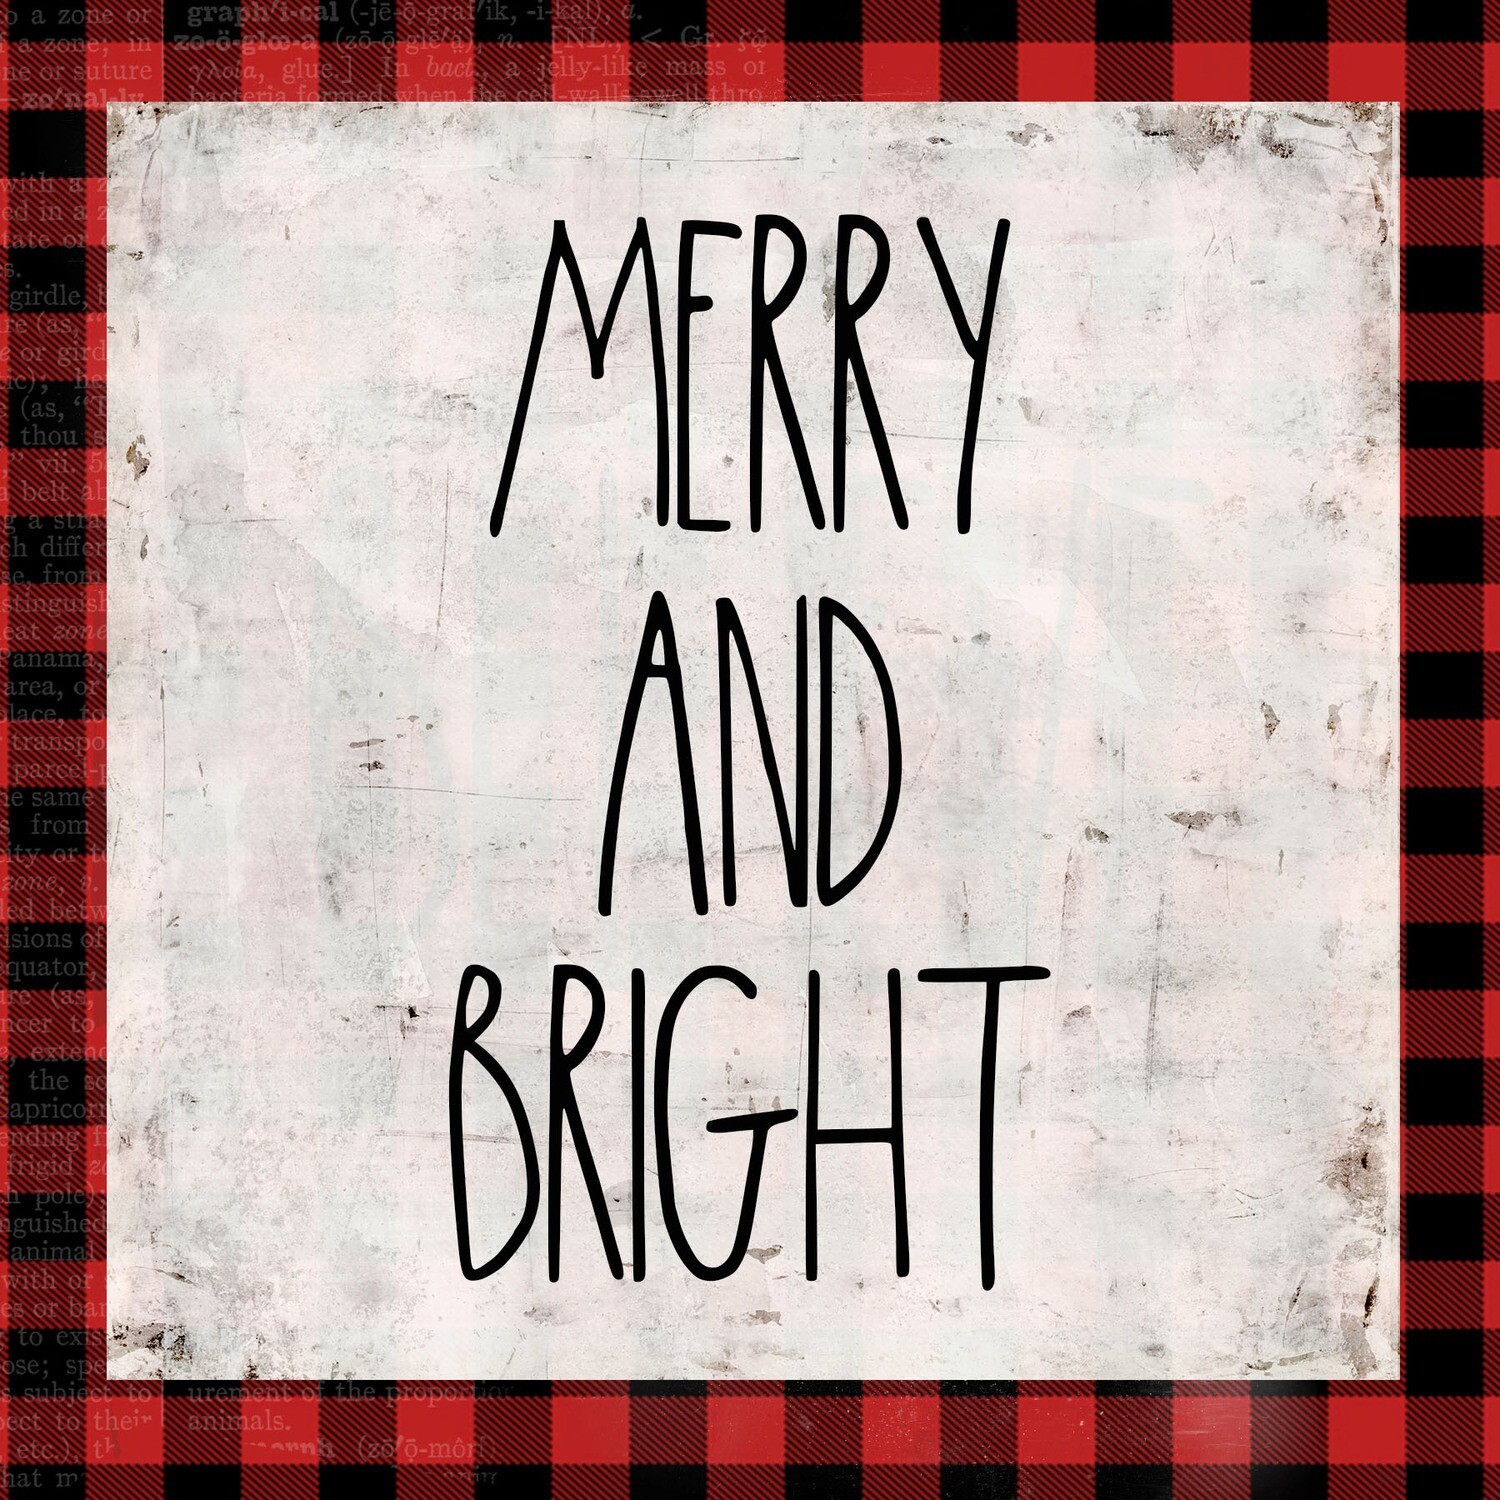 "Merry and Bright" Prints on Wood 6x6 Overstock